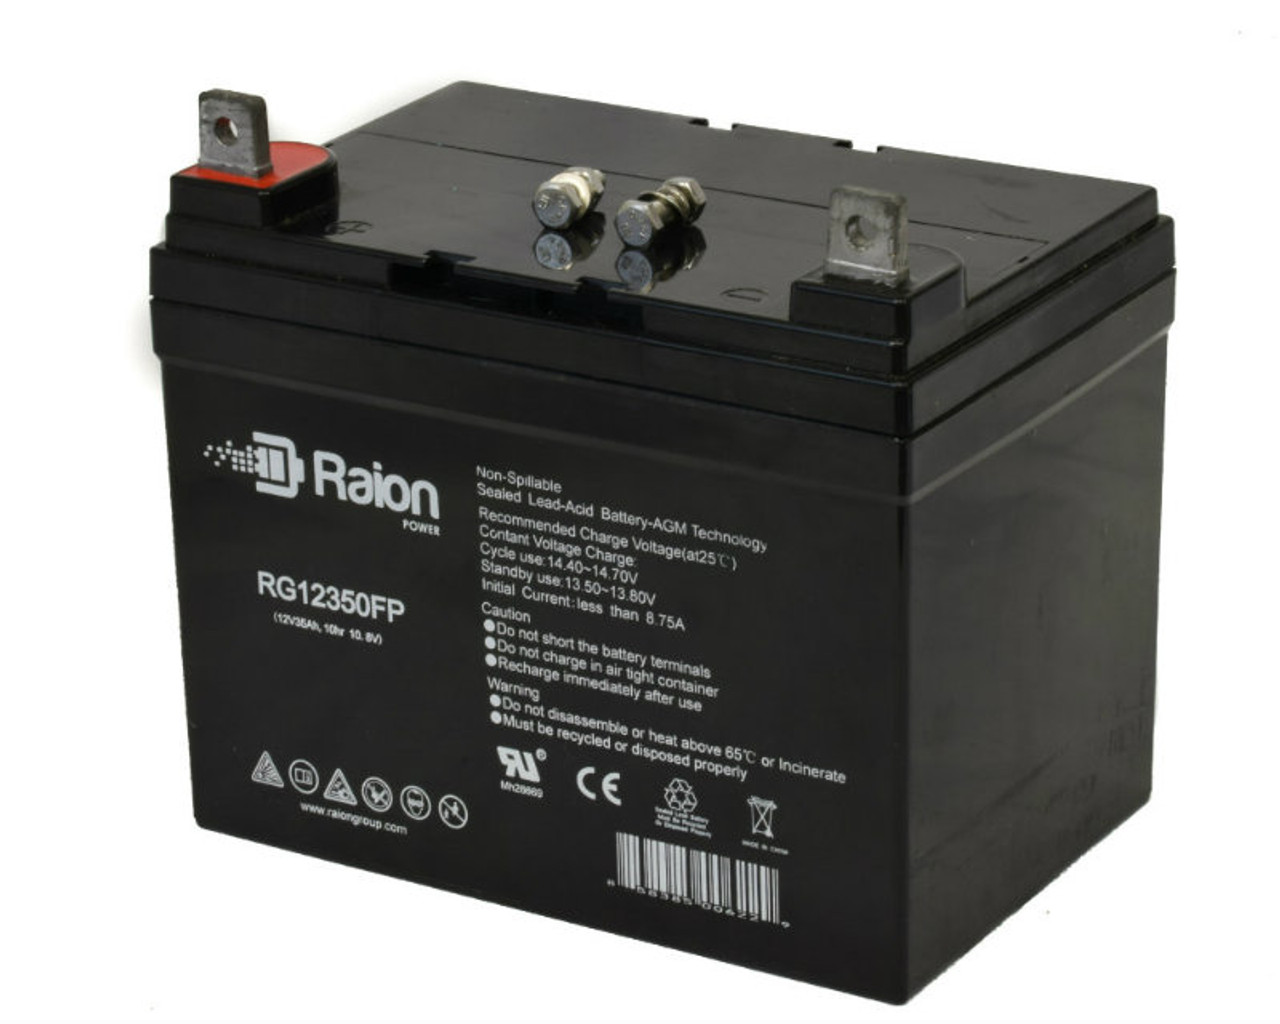 Raion Power Replacement 12V 35Ah RG12350FP Battery for Yazoo Kees ZKW 61252